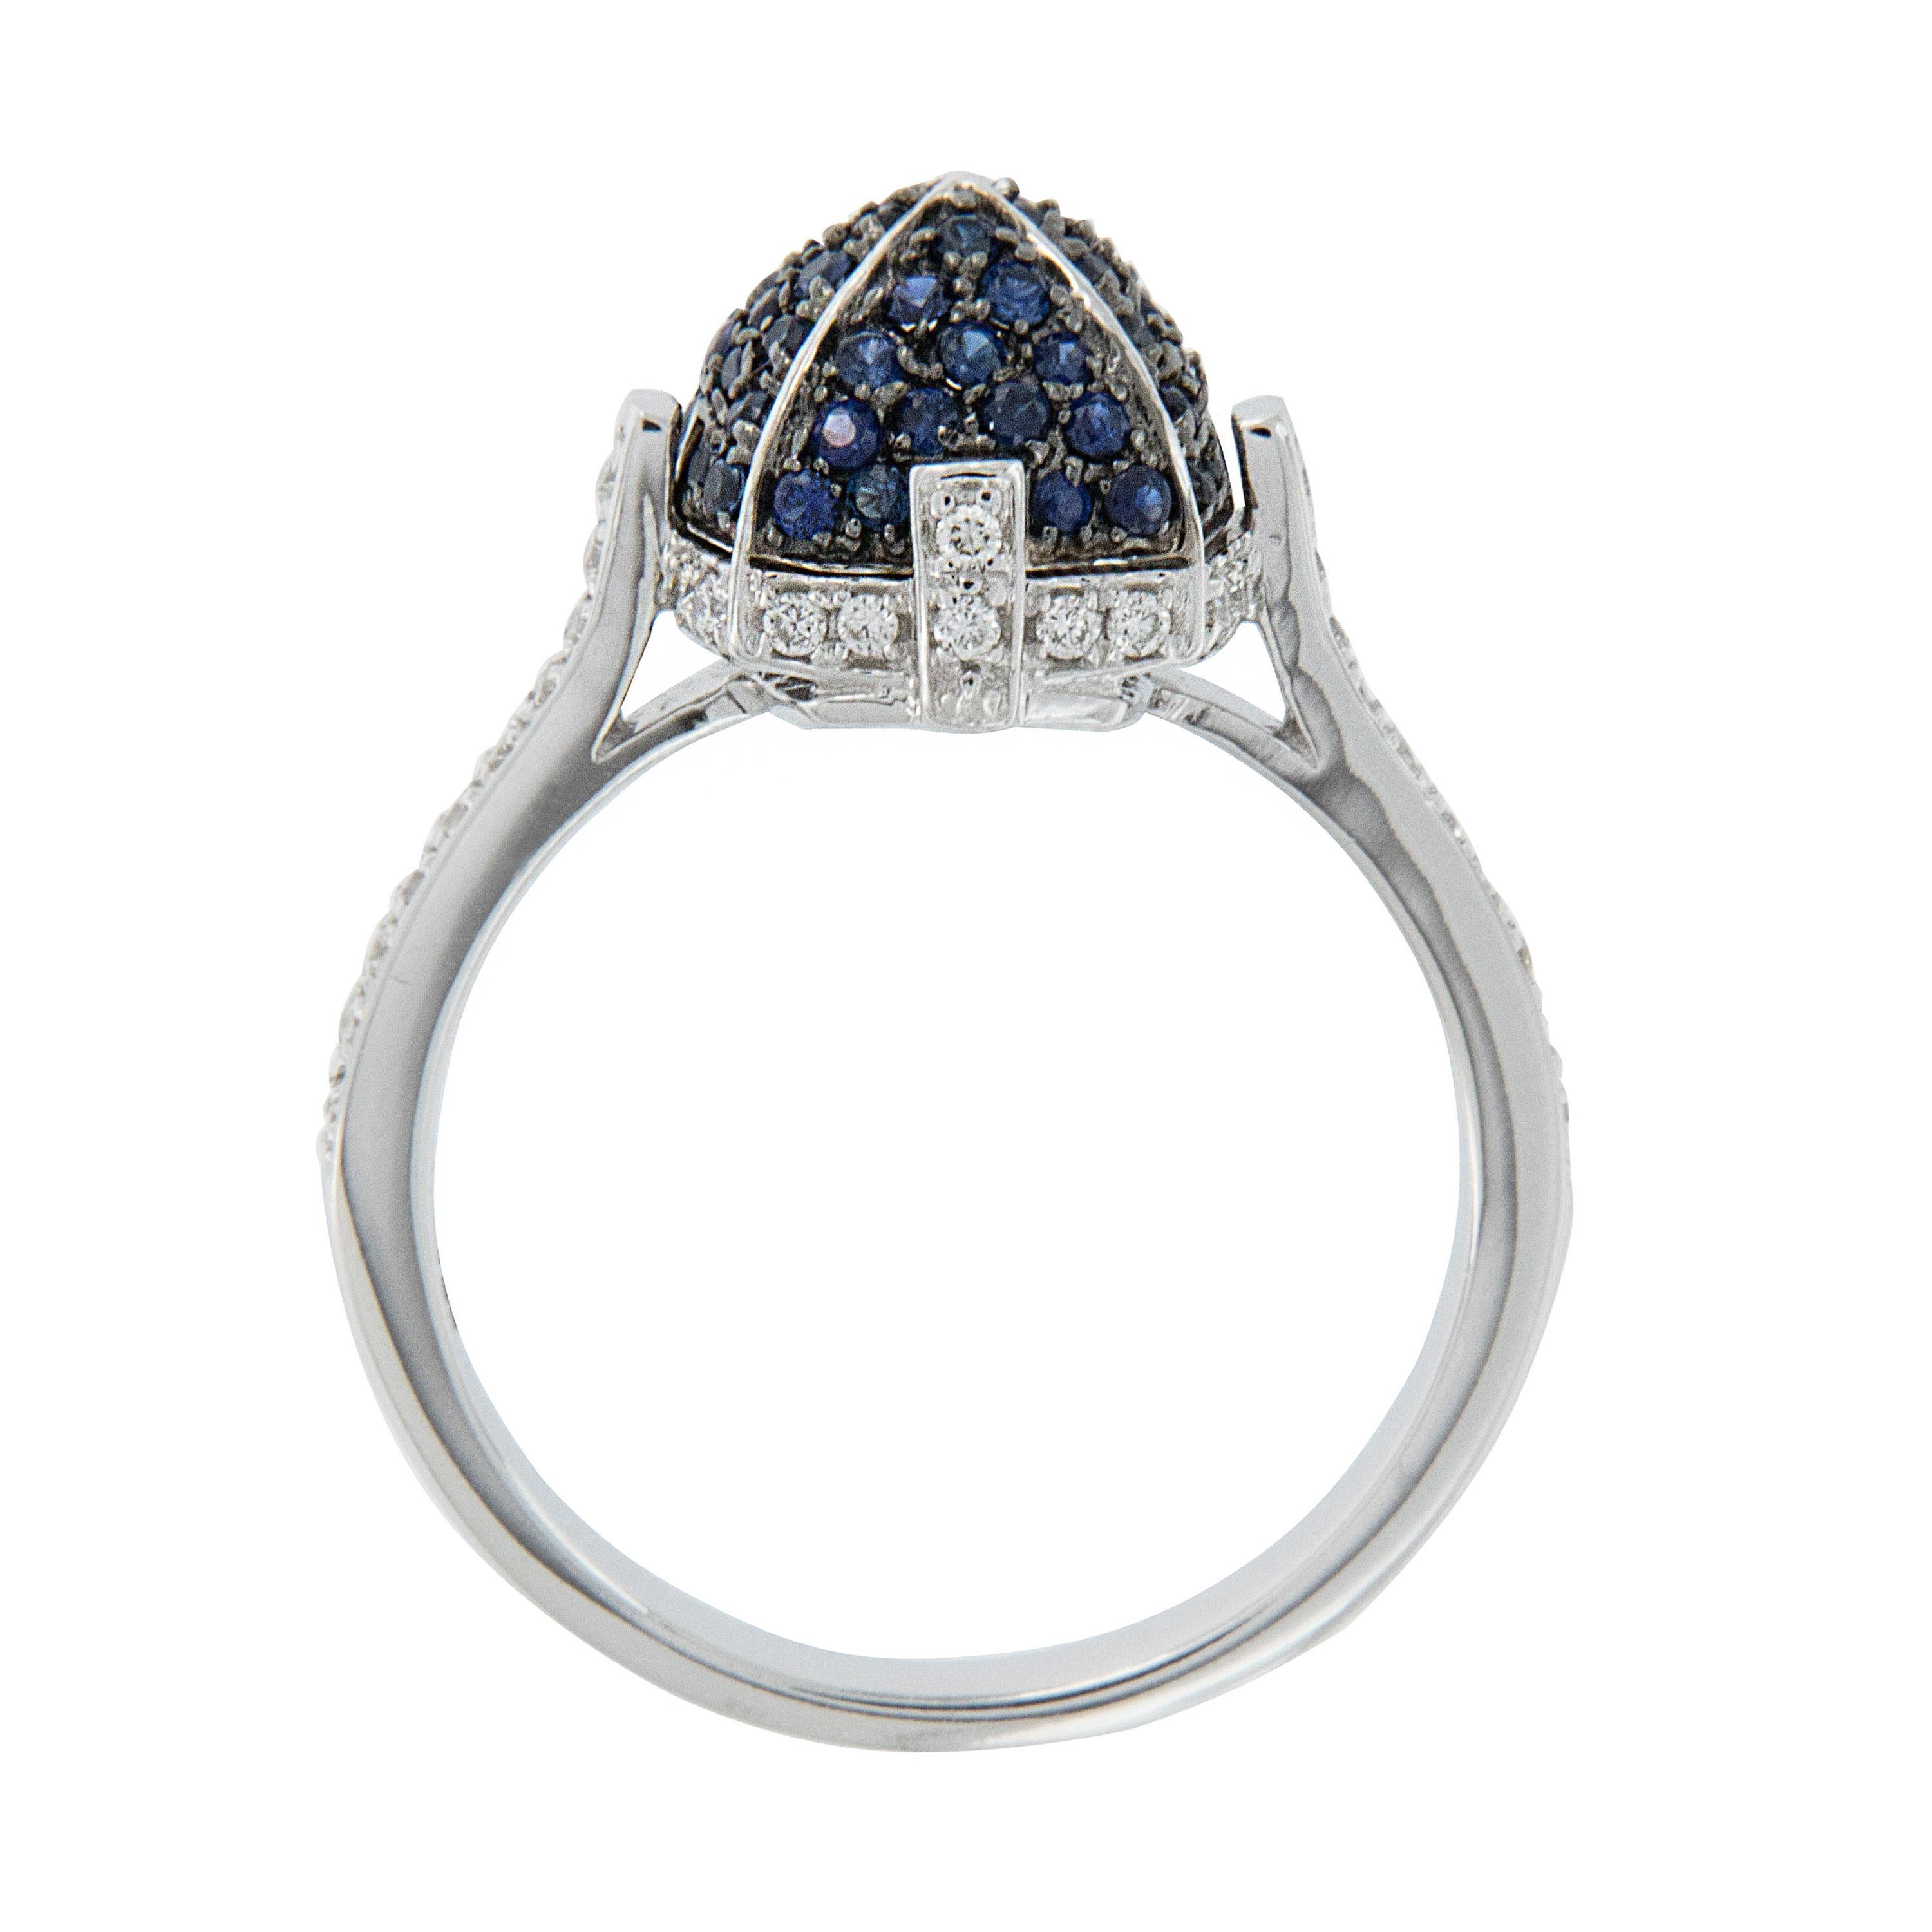 Goshwara, a term for perfect shape, is a company known for exceptional color gems and this 18 karat white gold Sugarloaf pave' ring which showcases 0.65 Cttw. blue sapphires & 0.15 Cttw diamonds shows it! 

Size 6.25, 11 x 11mm